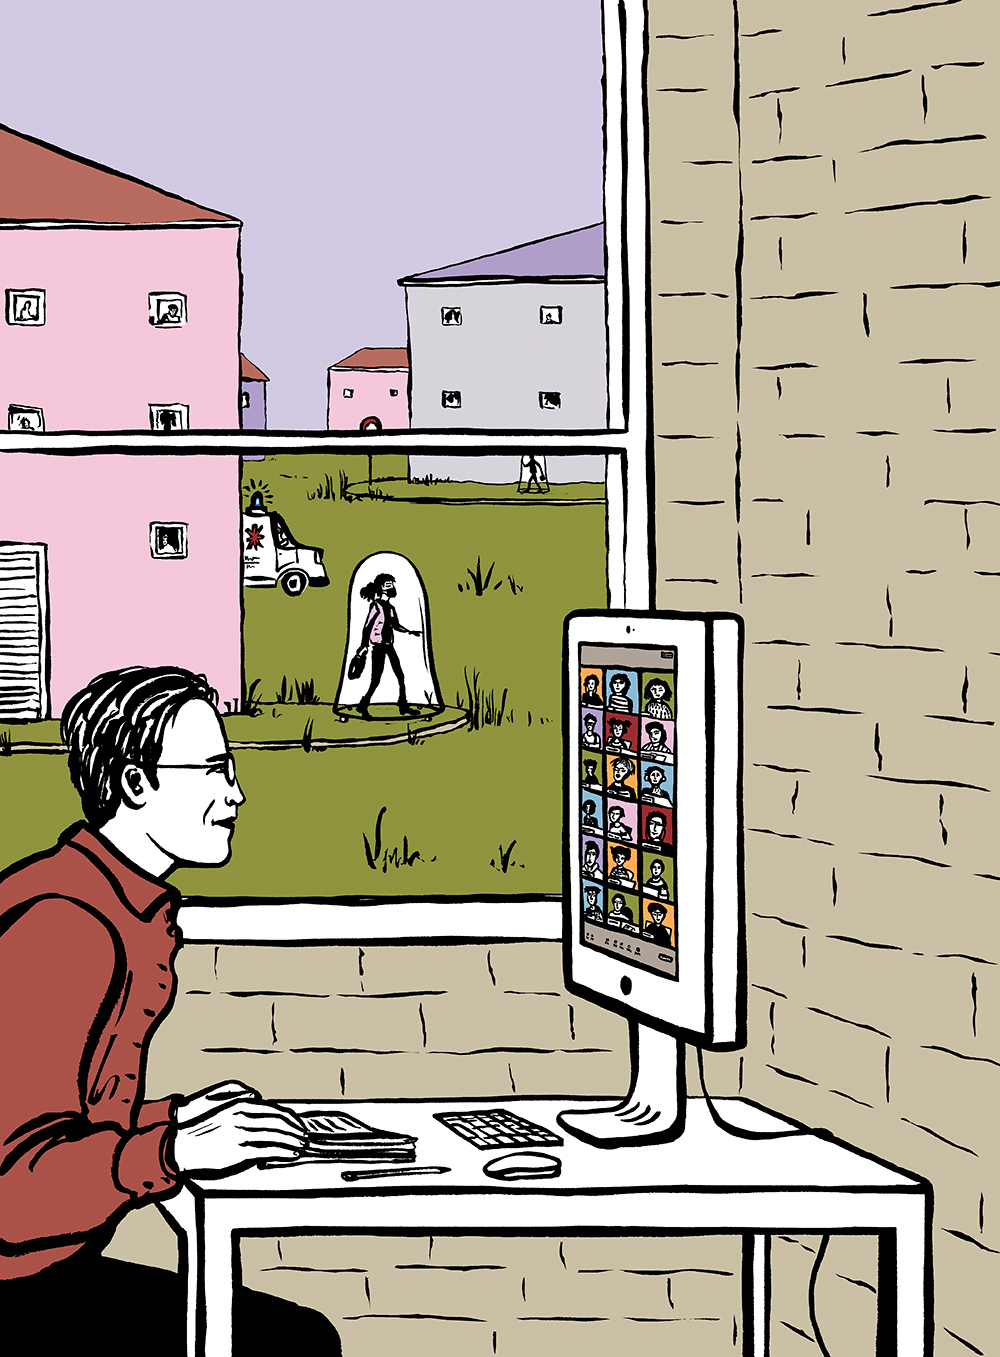 An illustration of a man working at a computer in front of a window